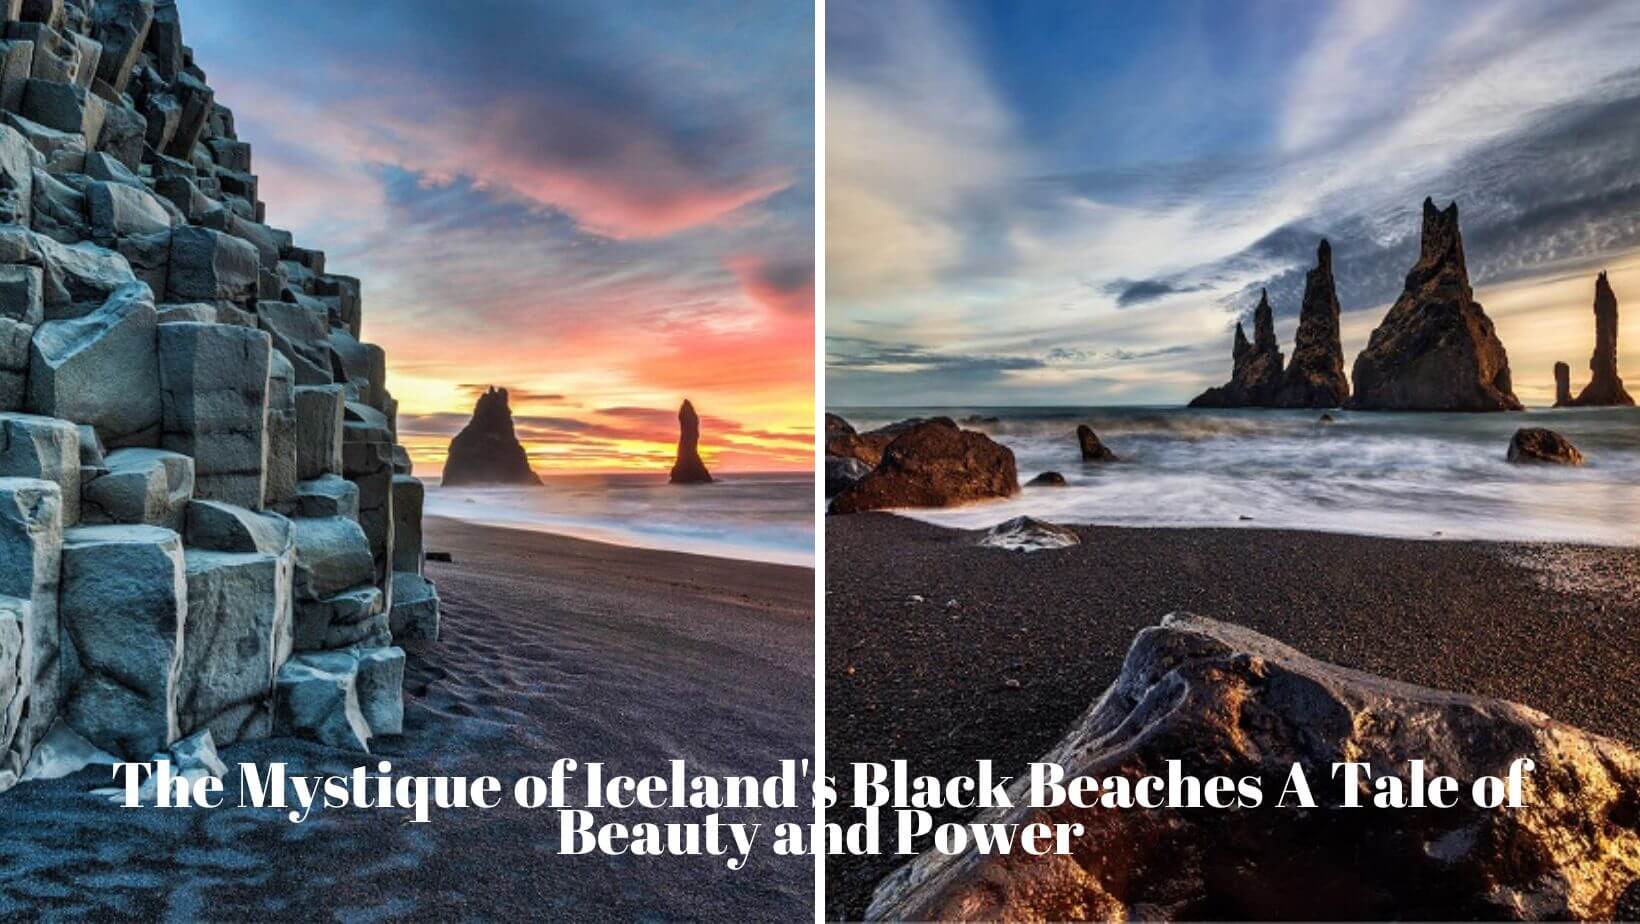 The Mystique of Iceland's Black Beaches A Tale of Beauty and Power